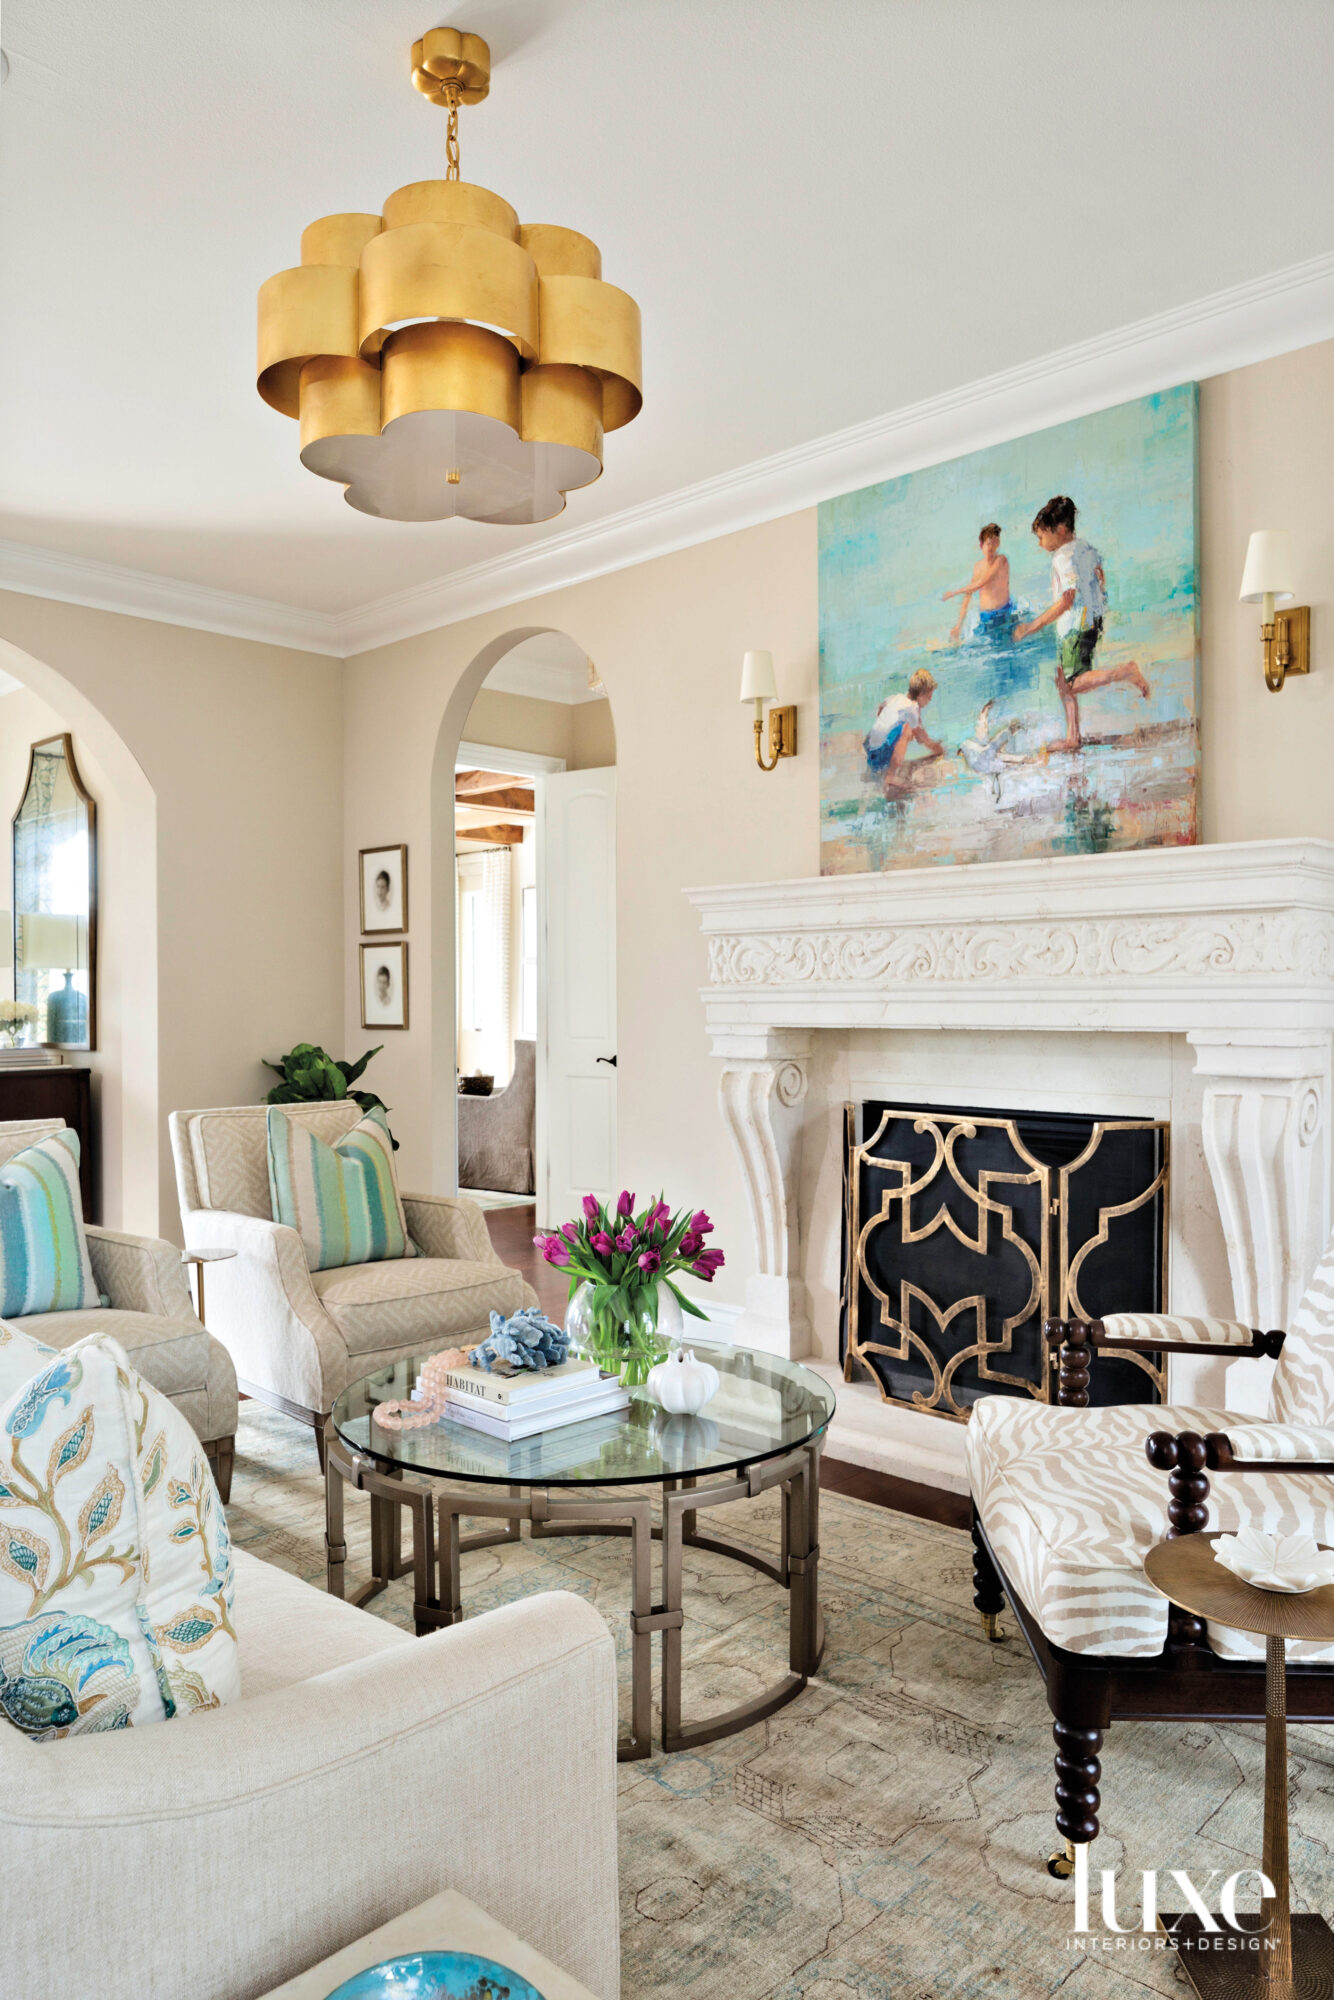 Cream-colored living room with accents of blue and green, and a gold light fixture.